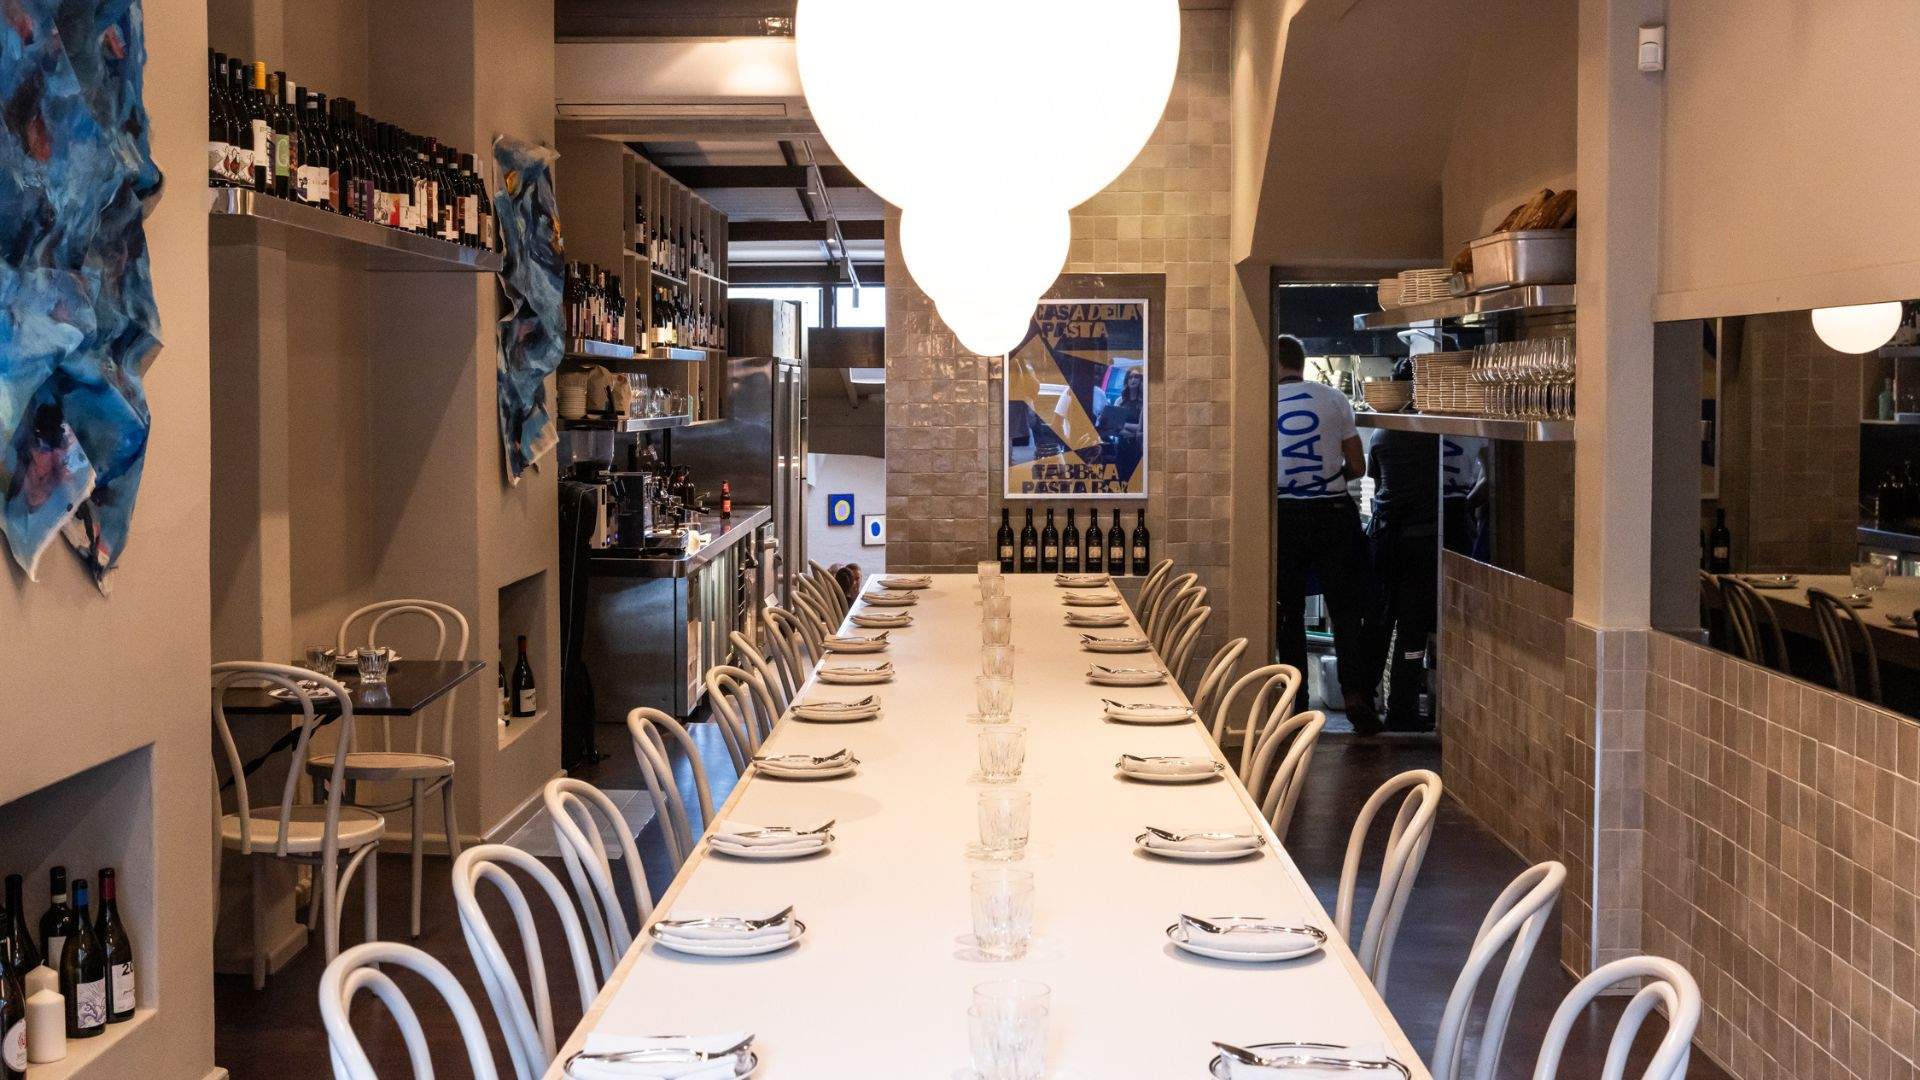 Now Open: Fabbrica Pasta Bar Has Returned with an 80-Seater Venue in A Tavola's Old Darlinghurst Digs